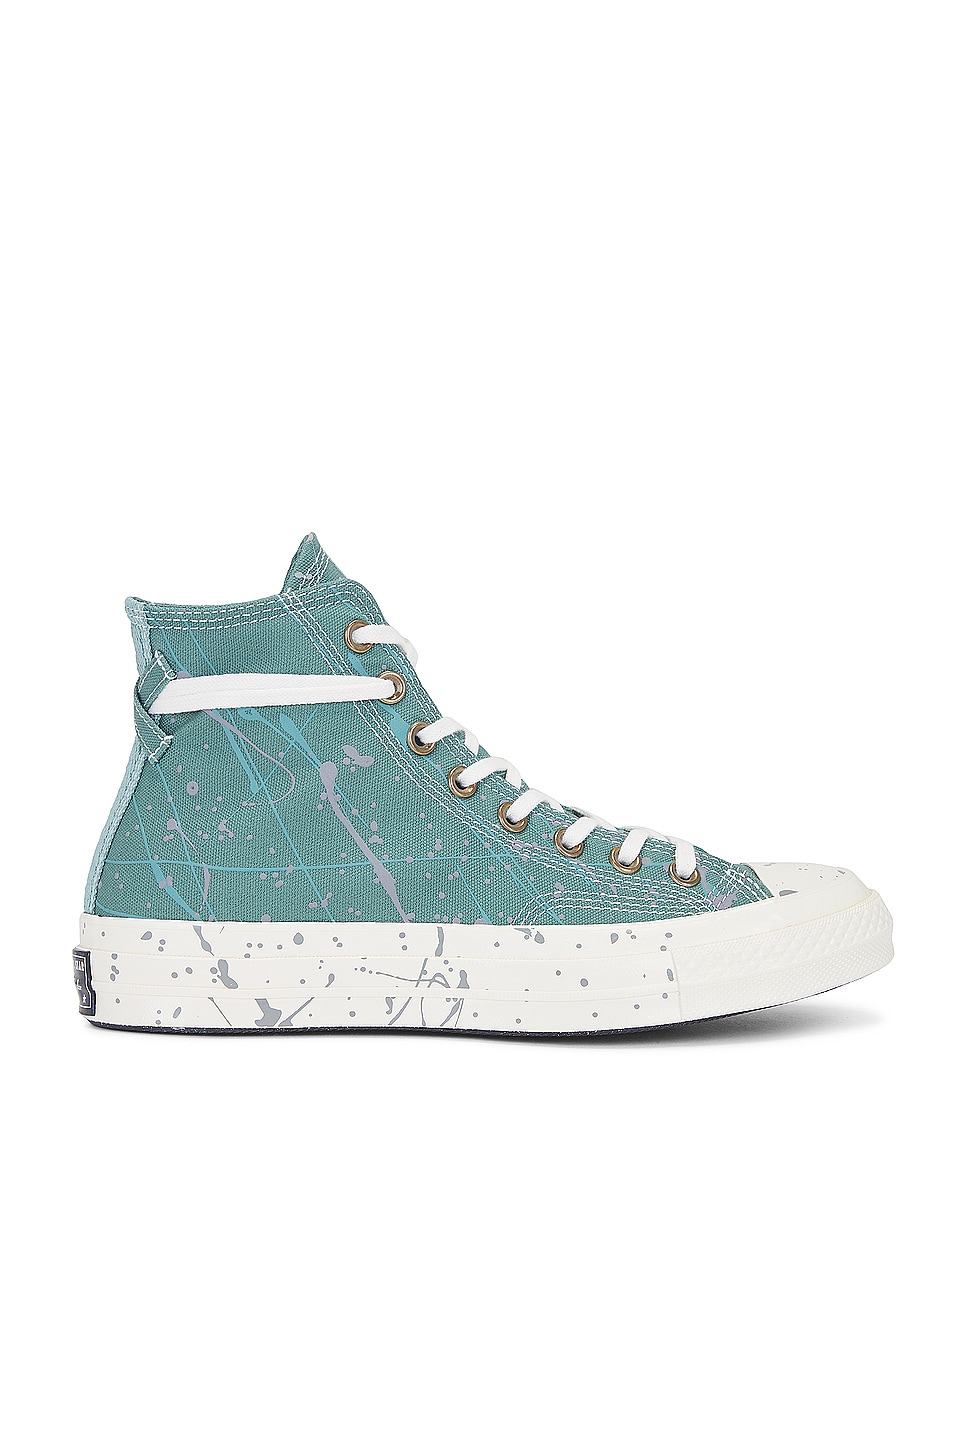 Image 1 of Converse Chuck 70 Paint Splatter in Admiral Elm, Herby, & Egret